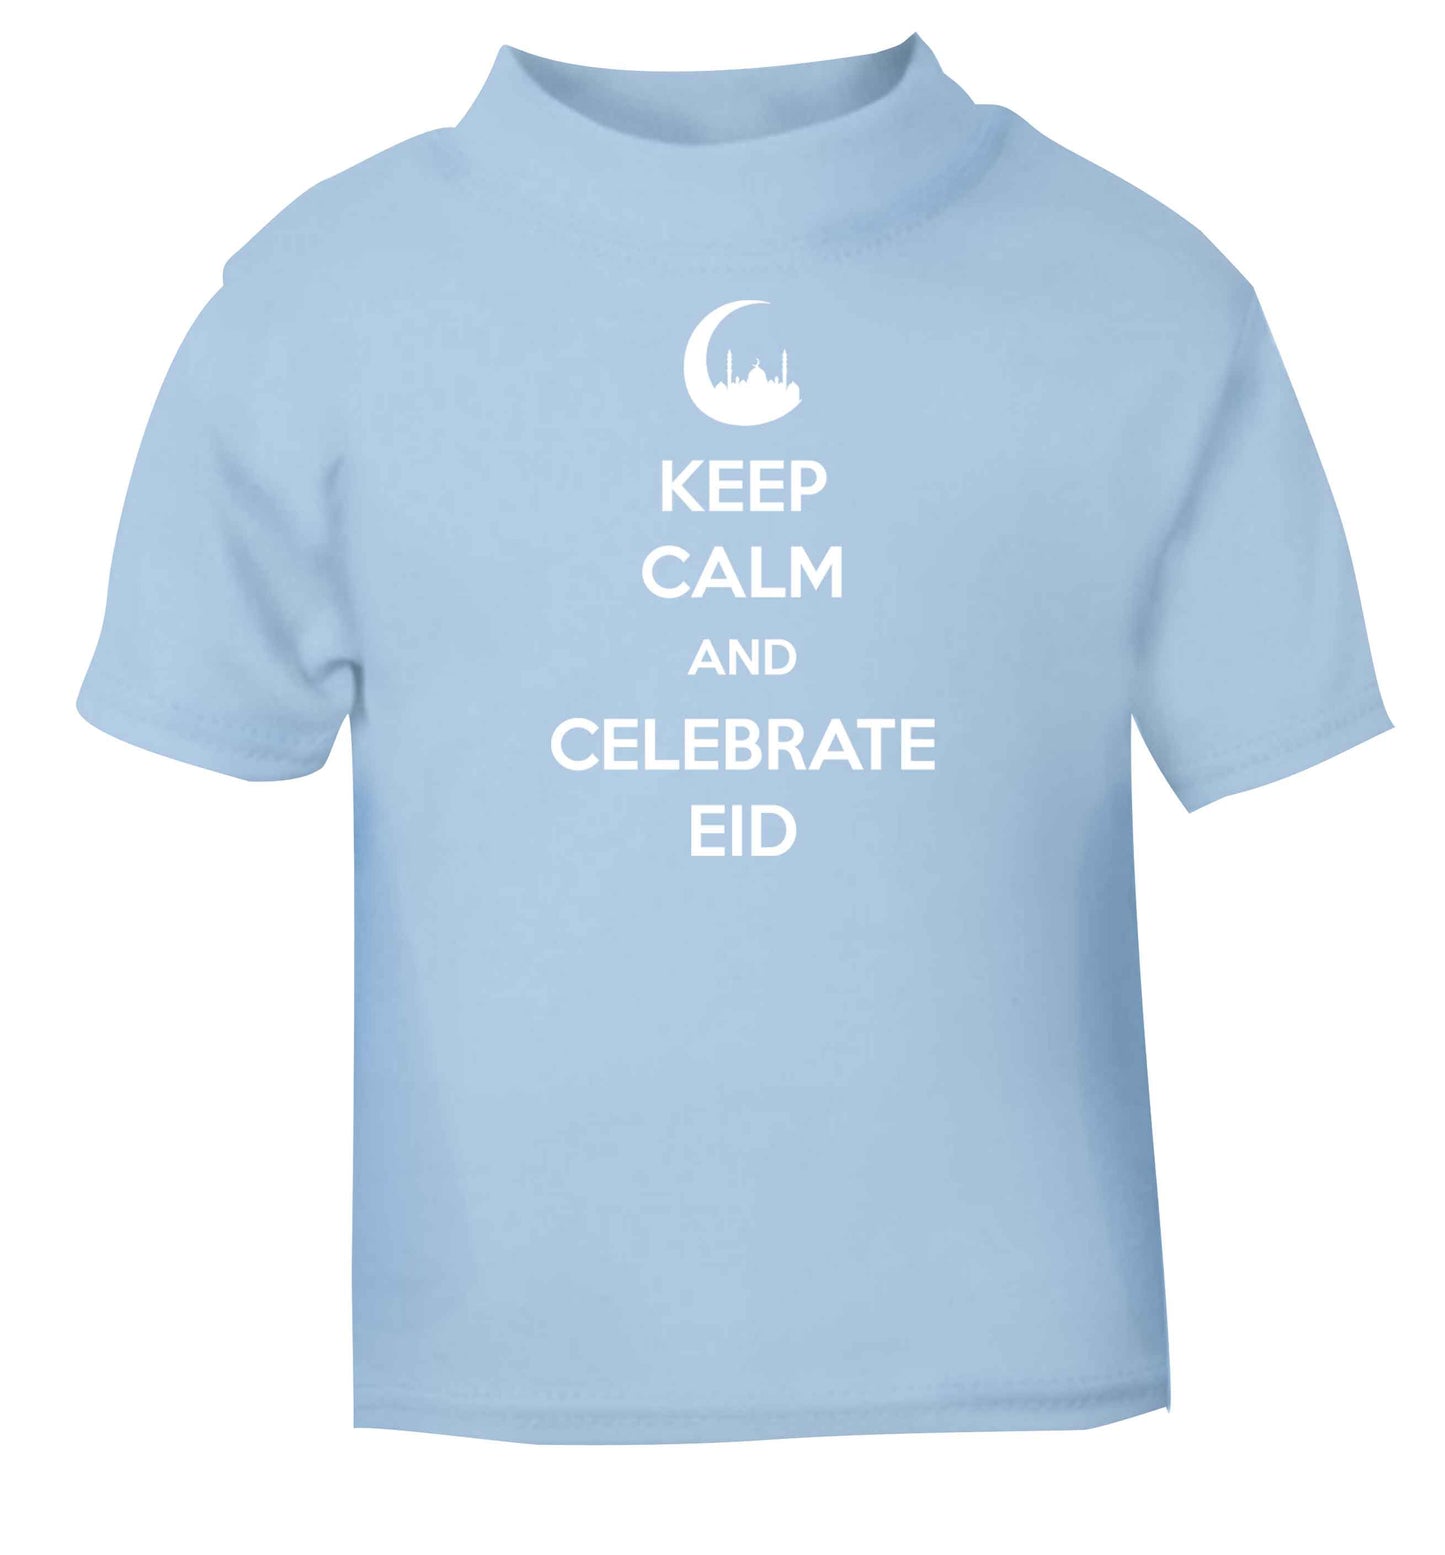 Keep calm and celebrate Eid light blue baby toddler Tshirt 2 Years